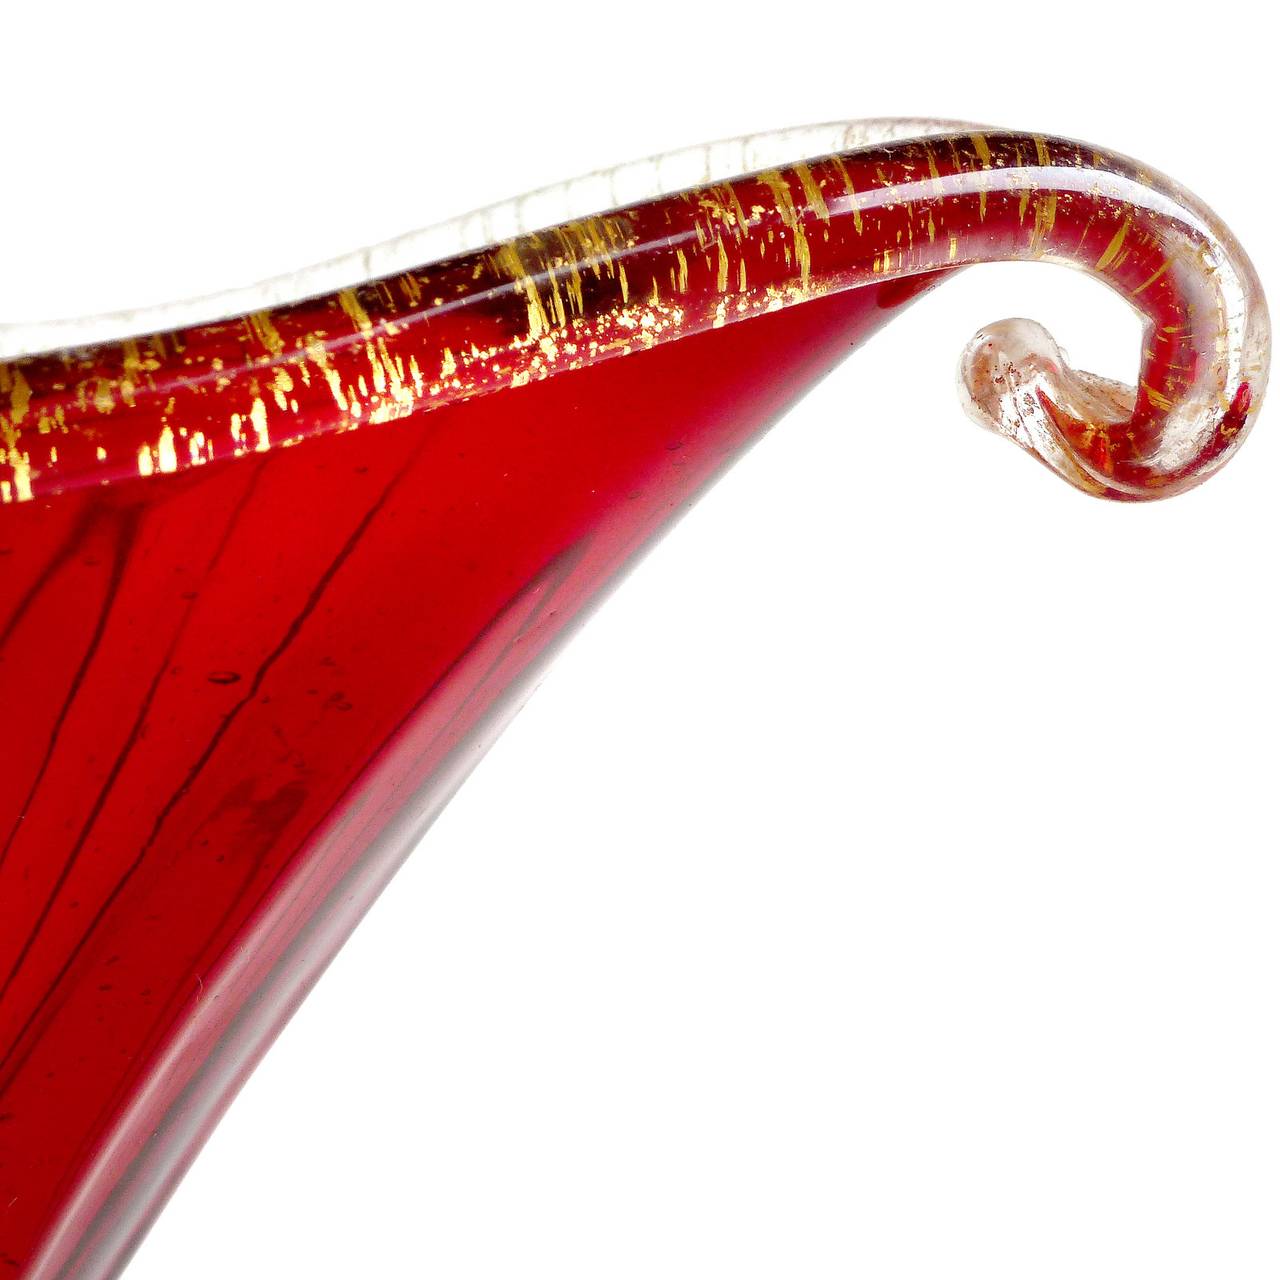 FREE Shipping Worldwide! See details below description.

Beautiful Murano Hand Blown Red and Gold Flecks Gondola Shape Bowl or Candy Dish. Attributed to the Barovier e Toso company. The piece has been lined with a gold band all around the rim, and